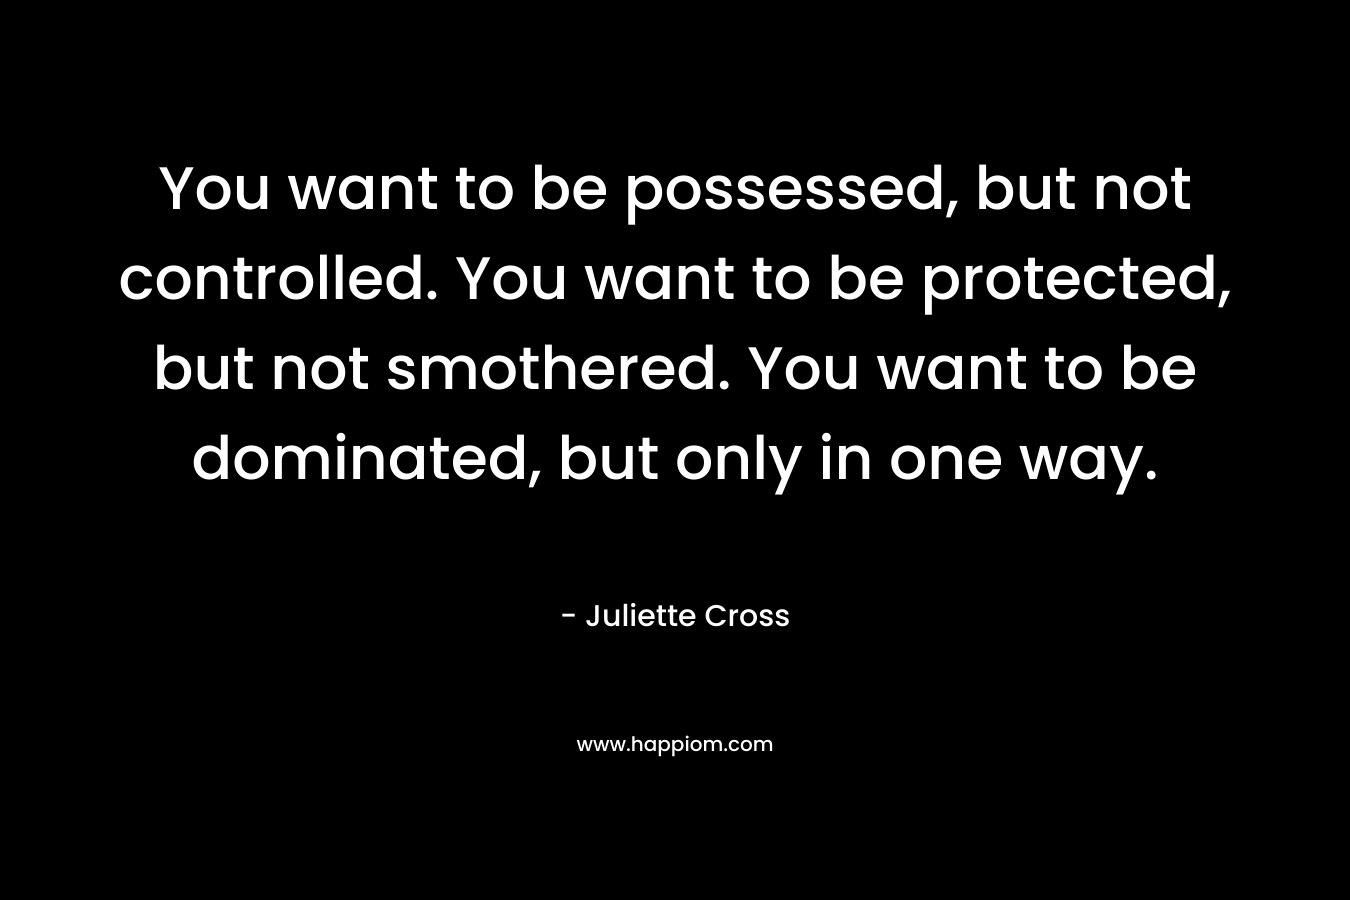 You want to be possessed, but not controlled. You want to be protected, but not smothered. You want to be dominated, but only in one way. – Juliette Cross